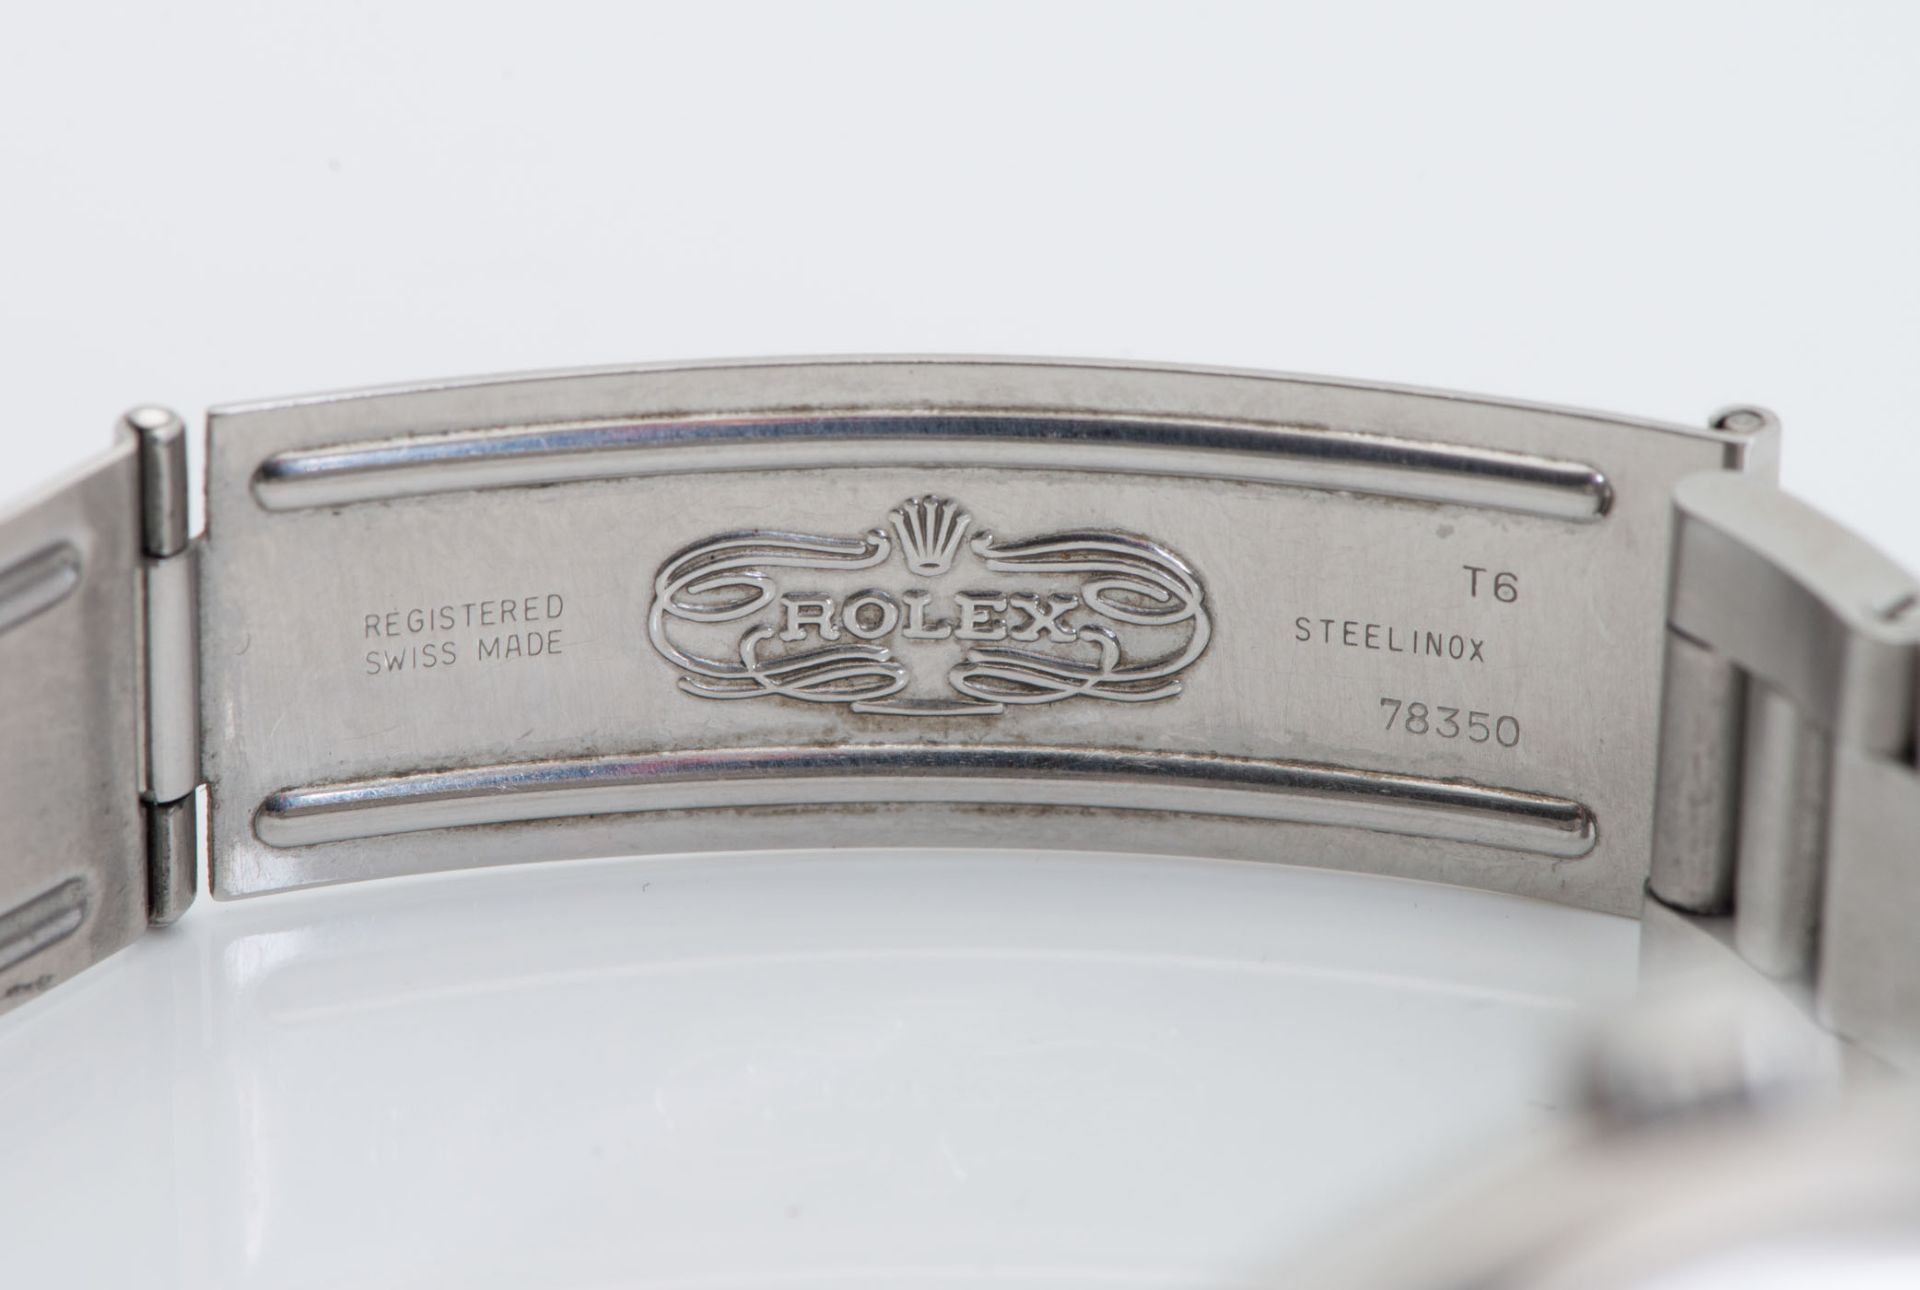 A Rolex Oyster Perpetual Wristwatch - Image 3 of 4